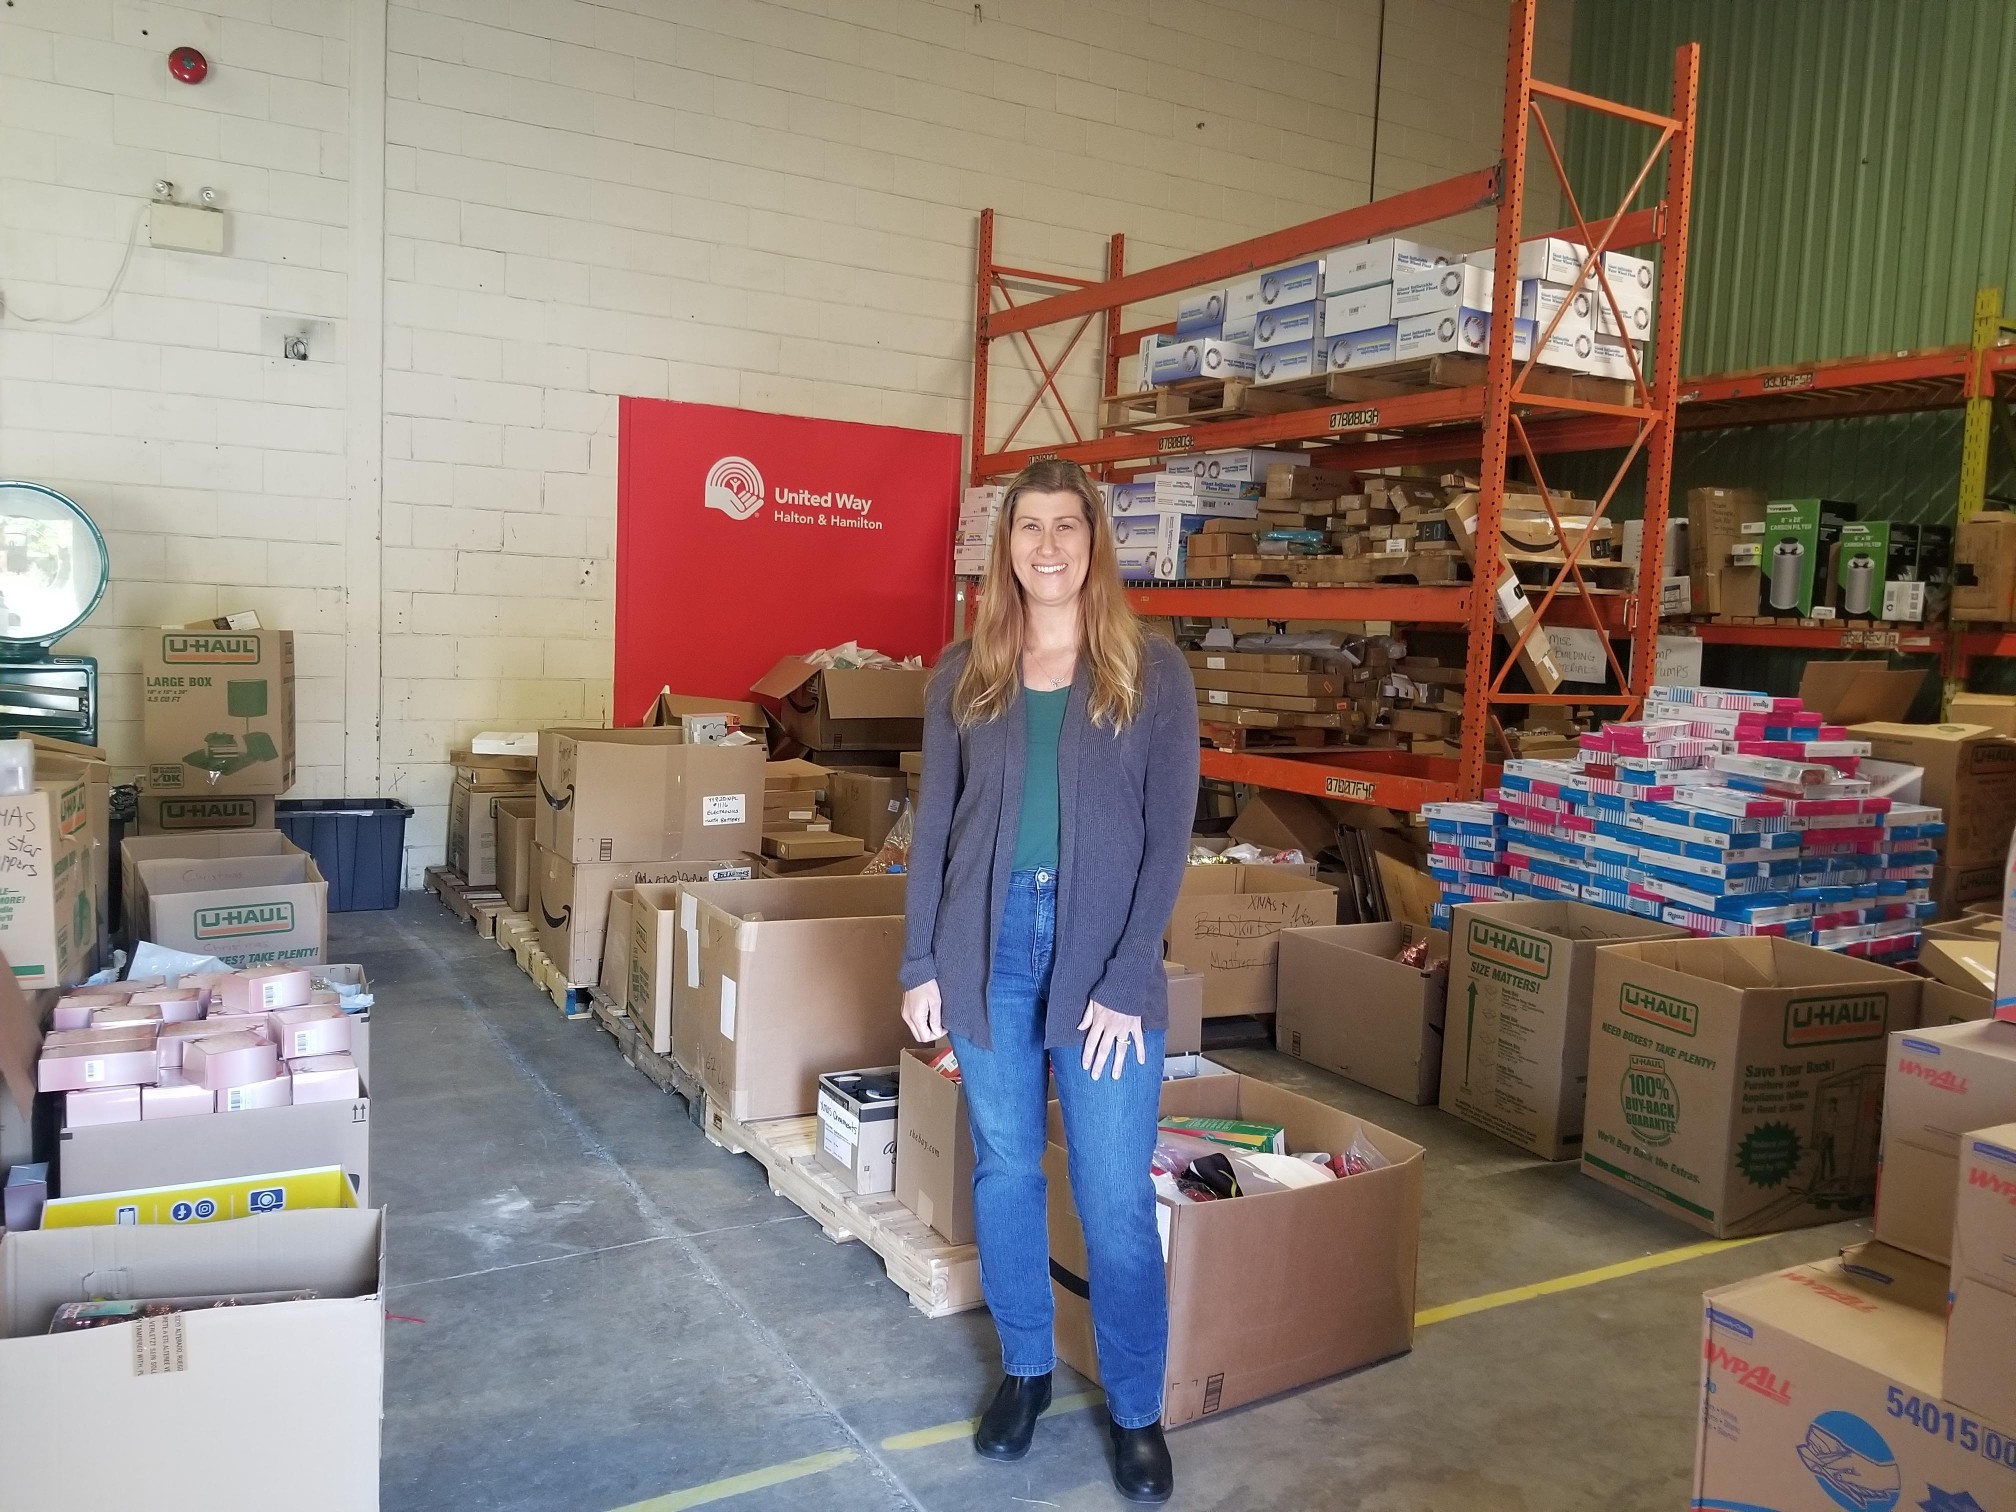 A woman stands in front of boxes and a tall shelf filled with boxes in a warehouse.